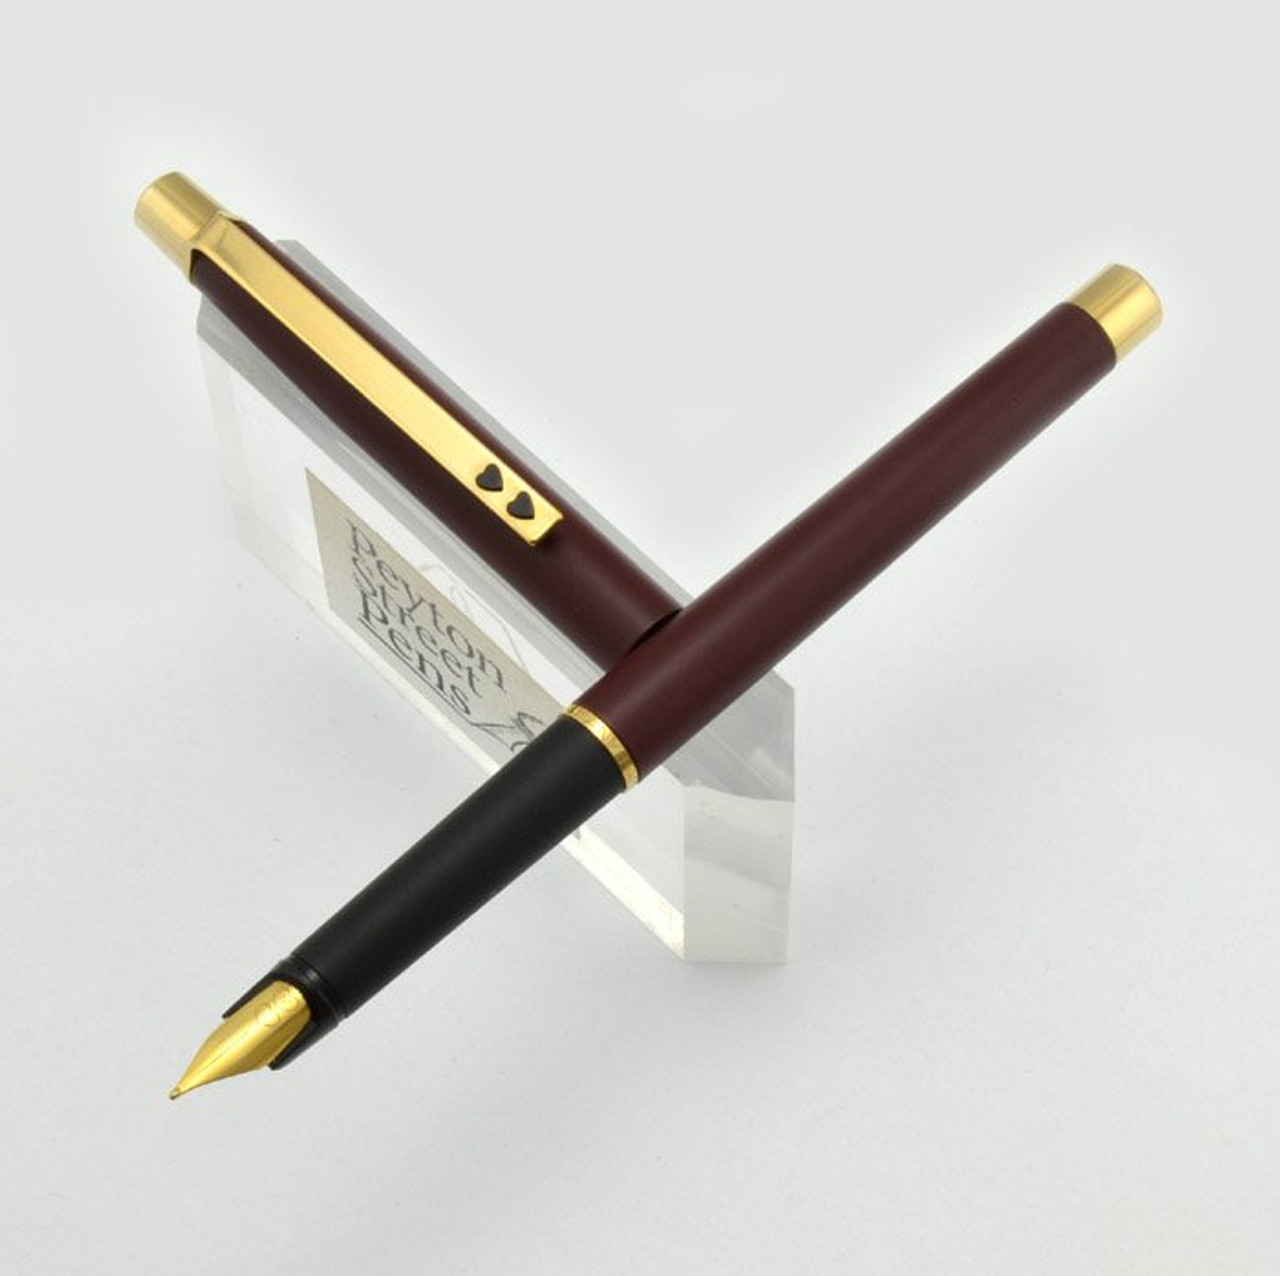 Papermate Fountain Pen 1980s - Burgundy, German Made, Medium (Excellent)